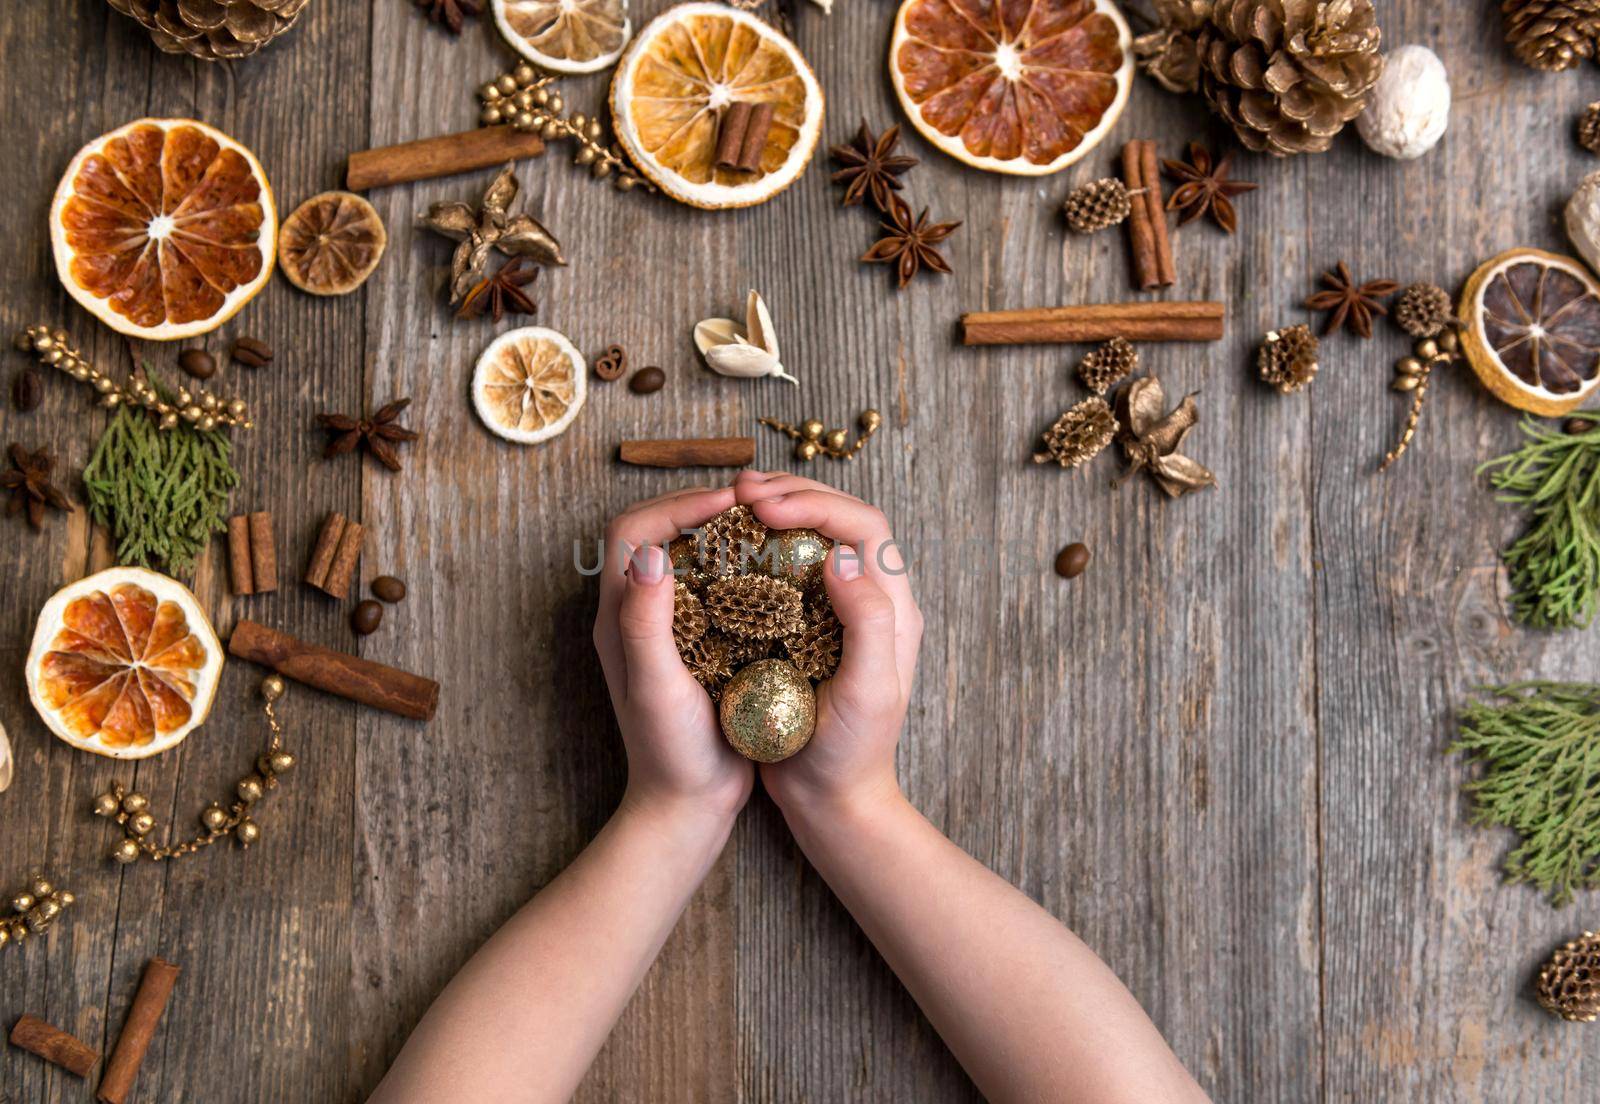 children's hands and Christmas decorations on an old wooden background with cinnamon and dried orange slices